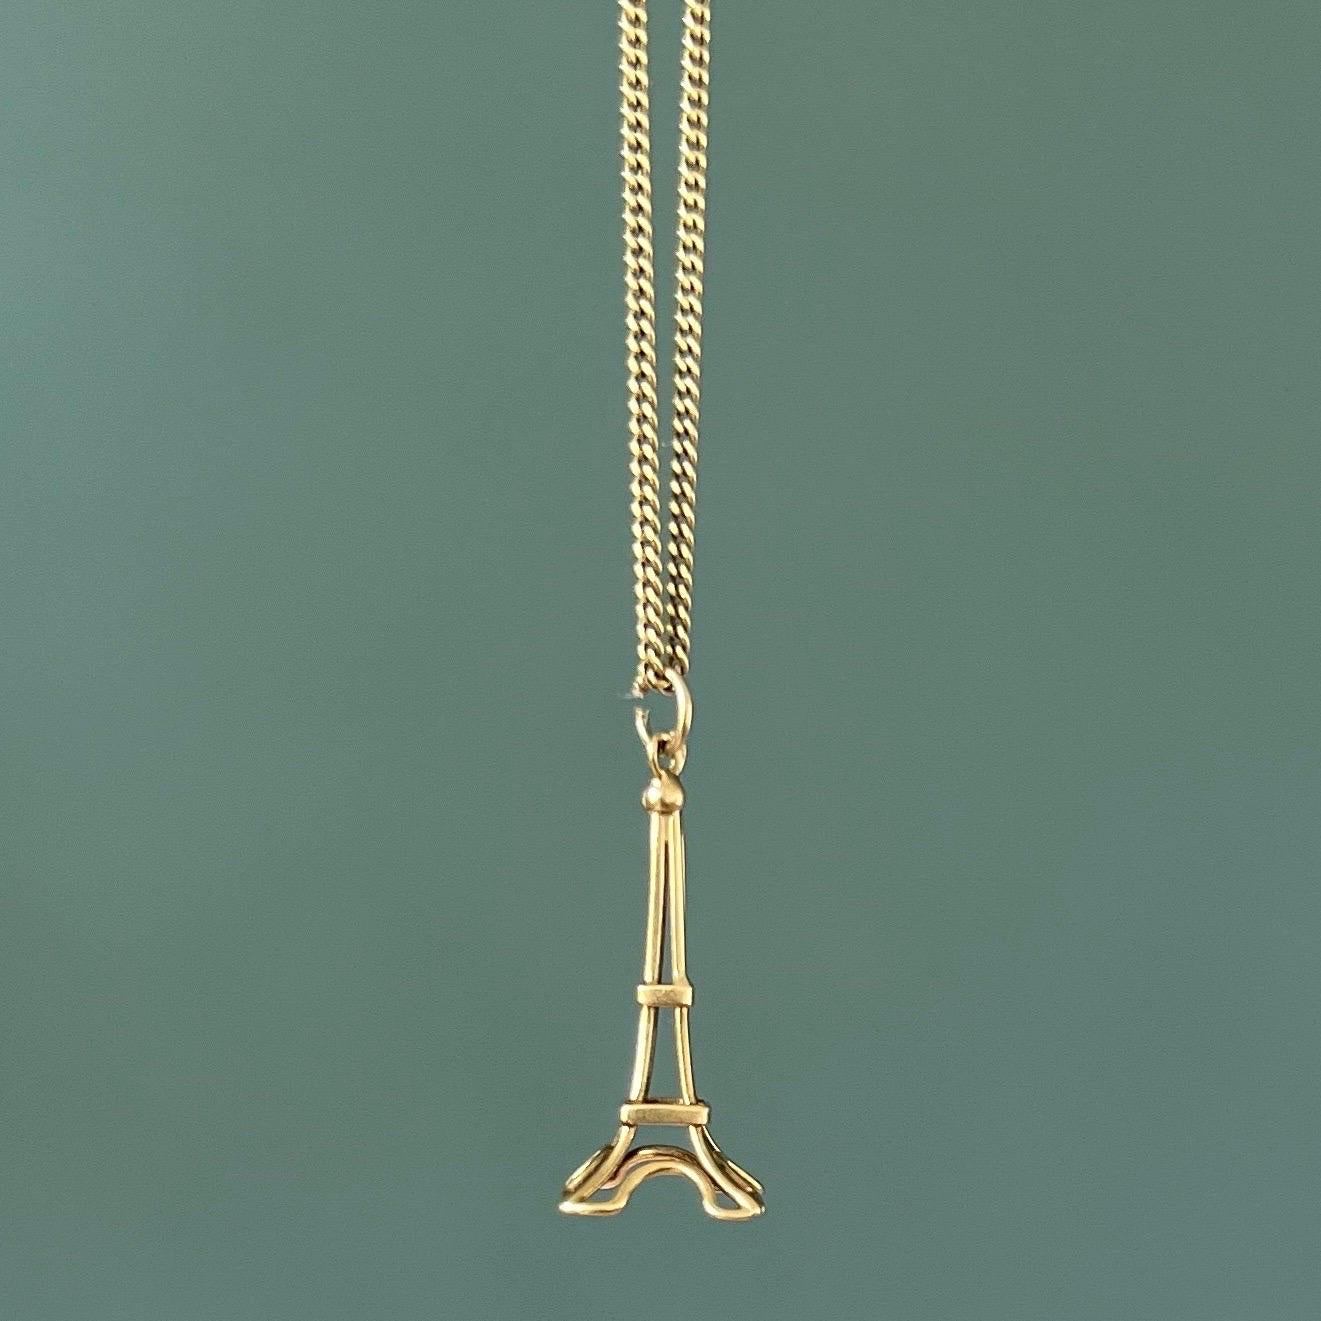 Bonjour, mon amour! This preloved Eiffel Tower charm is the symbol of Paris - the city of love. The charm is beautifully stylized and crafted in 14 karat gold and it looks like it's made out of one single thread. It stands firm as it does in real